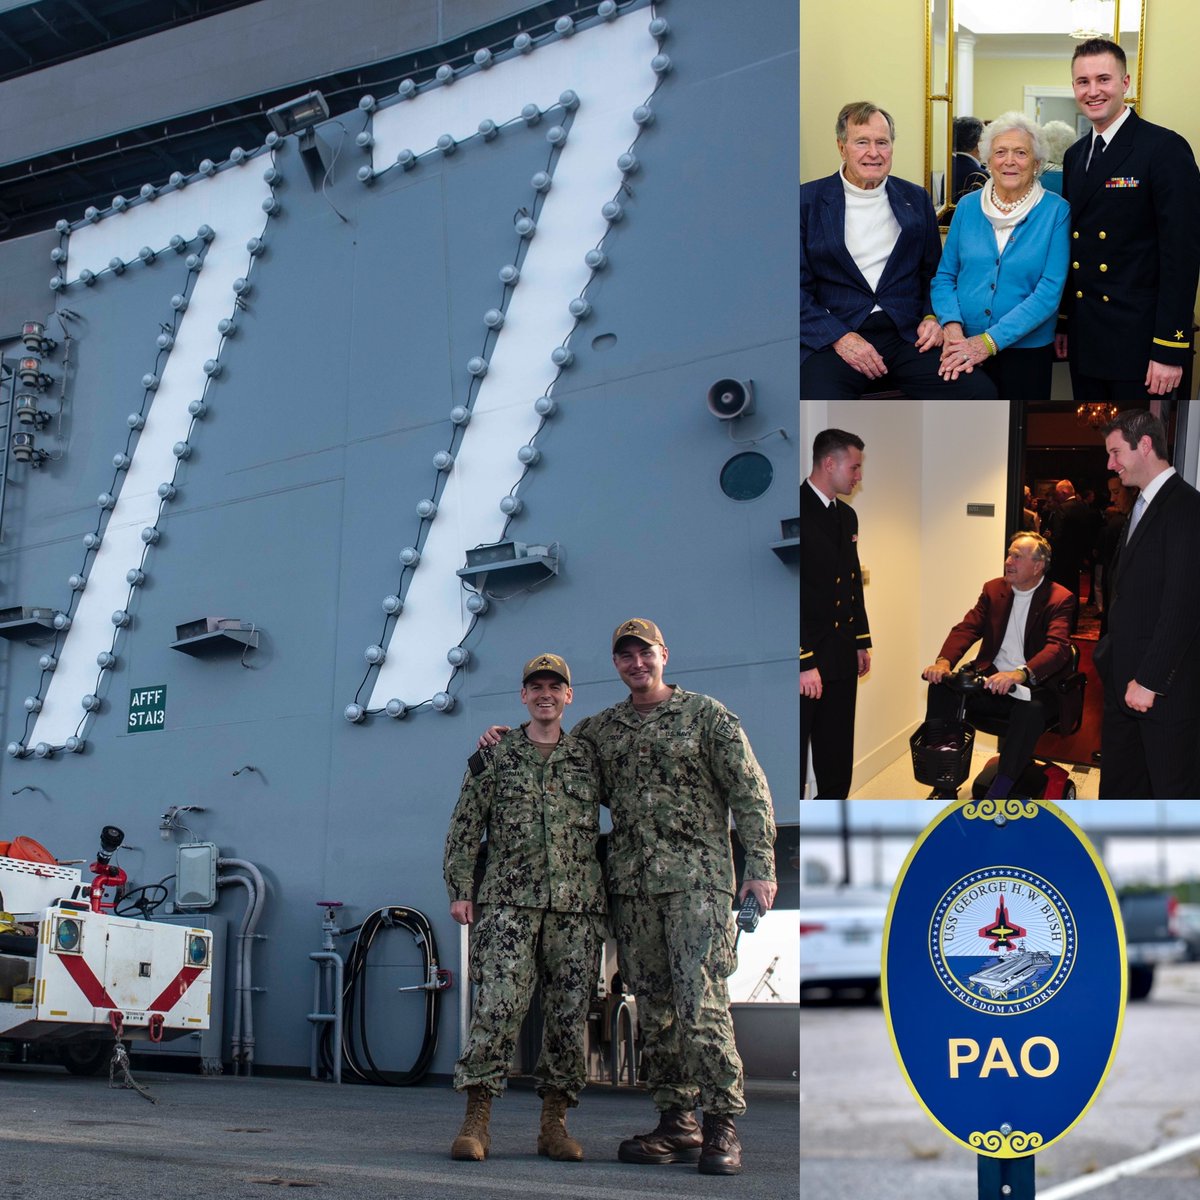 Grateful to complete turnover this week aboard USS George H.W. Bush (CVN 77). It was an honor to relieve a fellow CVN 77 alum, and I can't wait to be part of the crew that brings the ship back to life. #CAVU #FreedomAtWork #AForceToBeReckonedWith